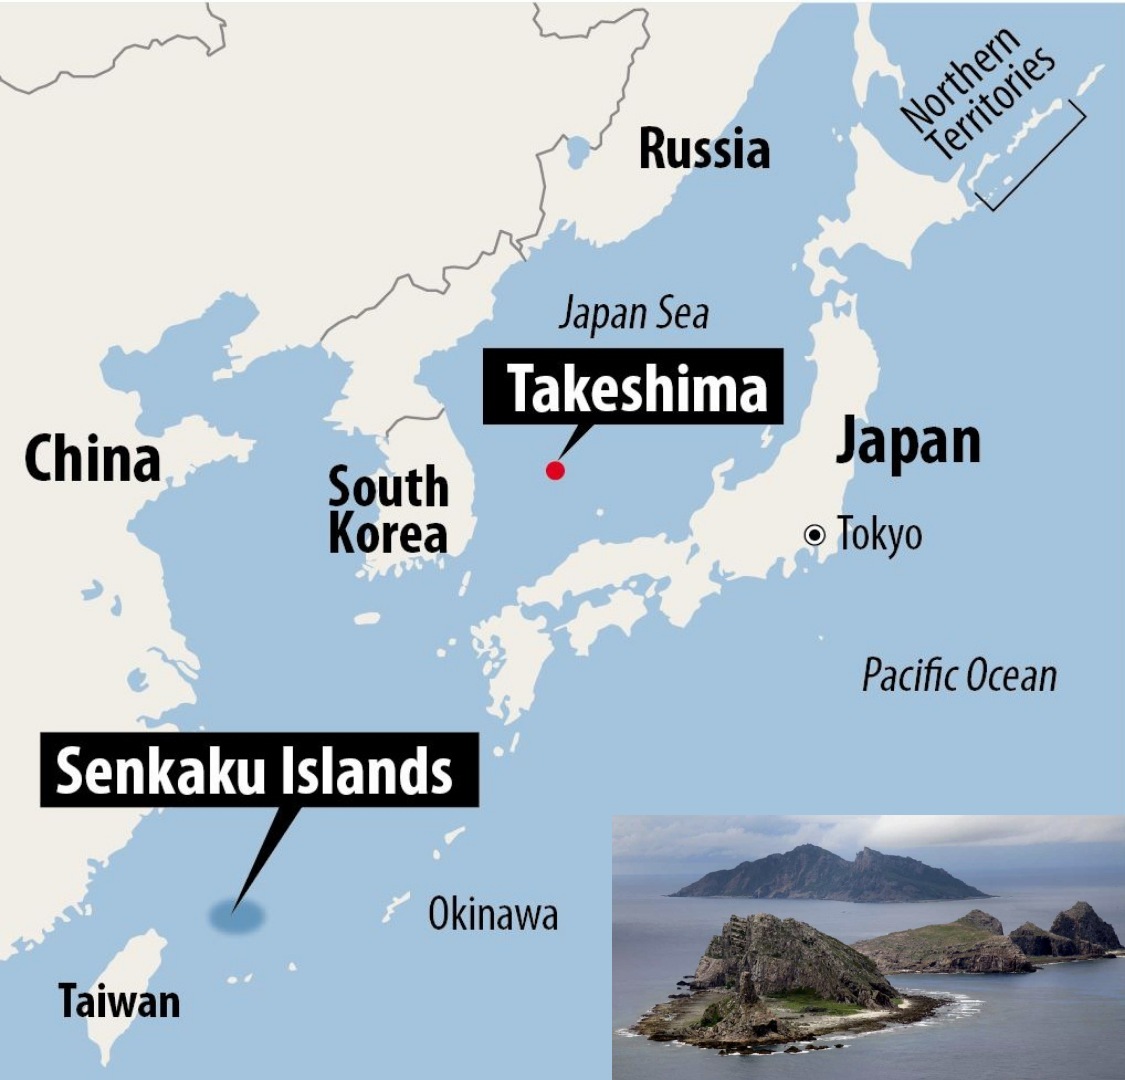 #JAPAN: Today, a patrol boat of the Japan #CoastGuard confirmed that 4 ships of #China's Coast Guard were navigating in the contiguous zone on the territorial side around the #SenkakuIslands 

It was the 26th day in a row that a Chinese govt ship was spotted near the Senkaku's.